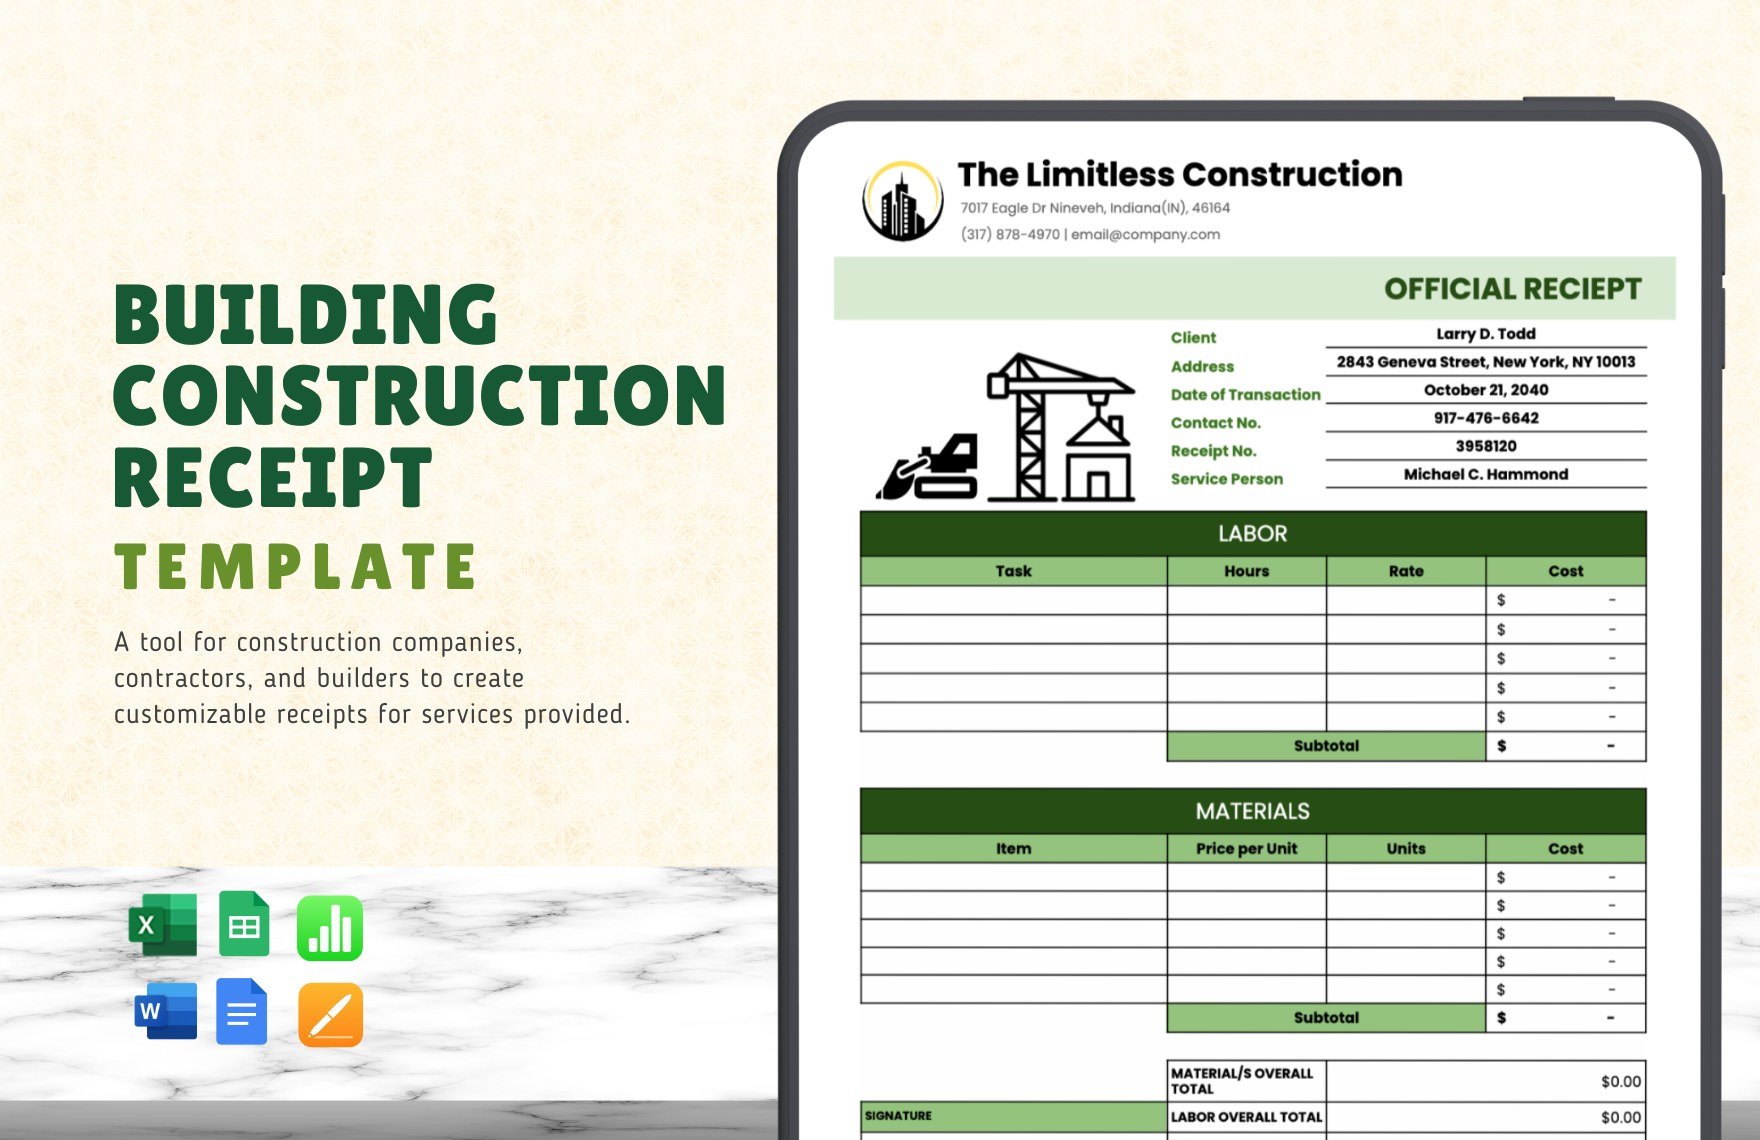 Building Construction Receipt Template in Word, Google Docs, Excel, Google Sheets, Apple Pages, Apple Numbers